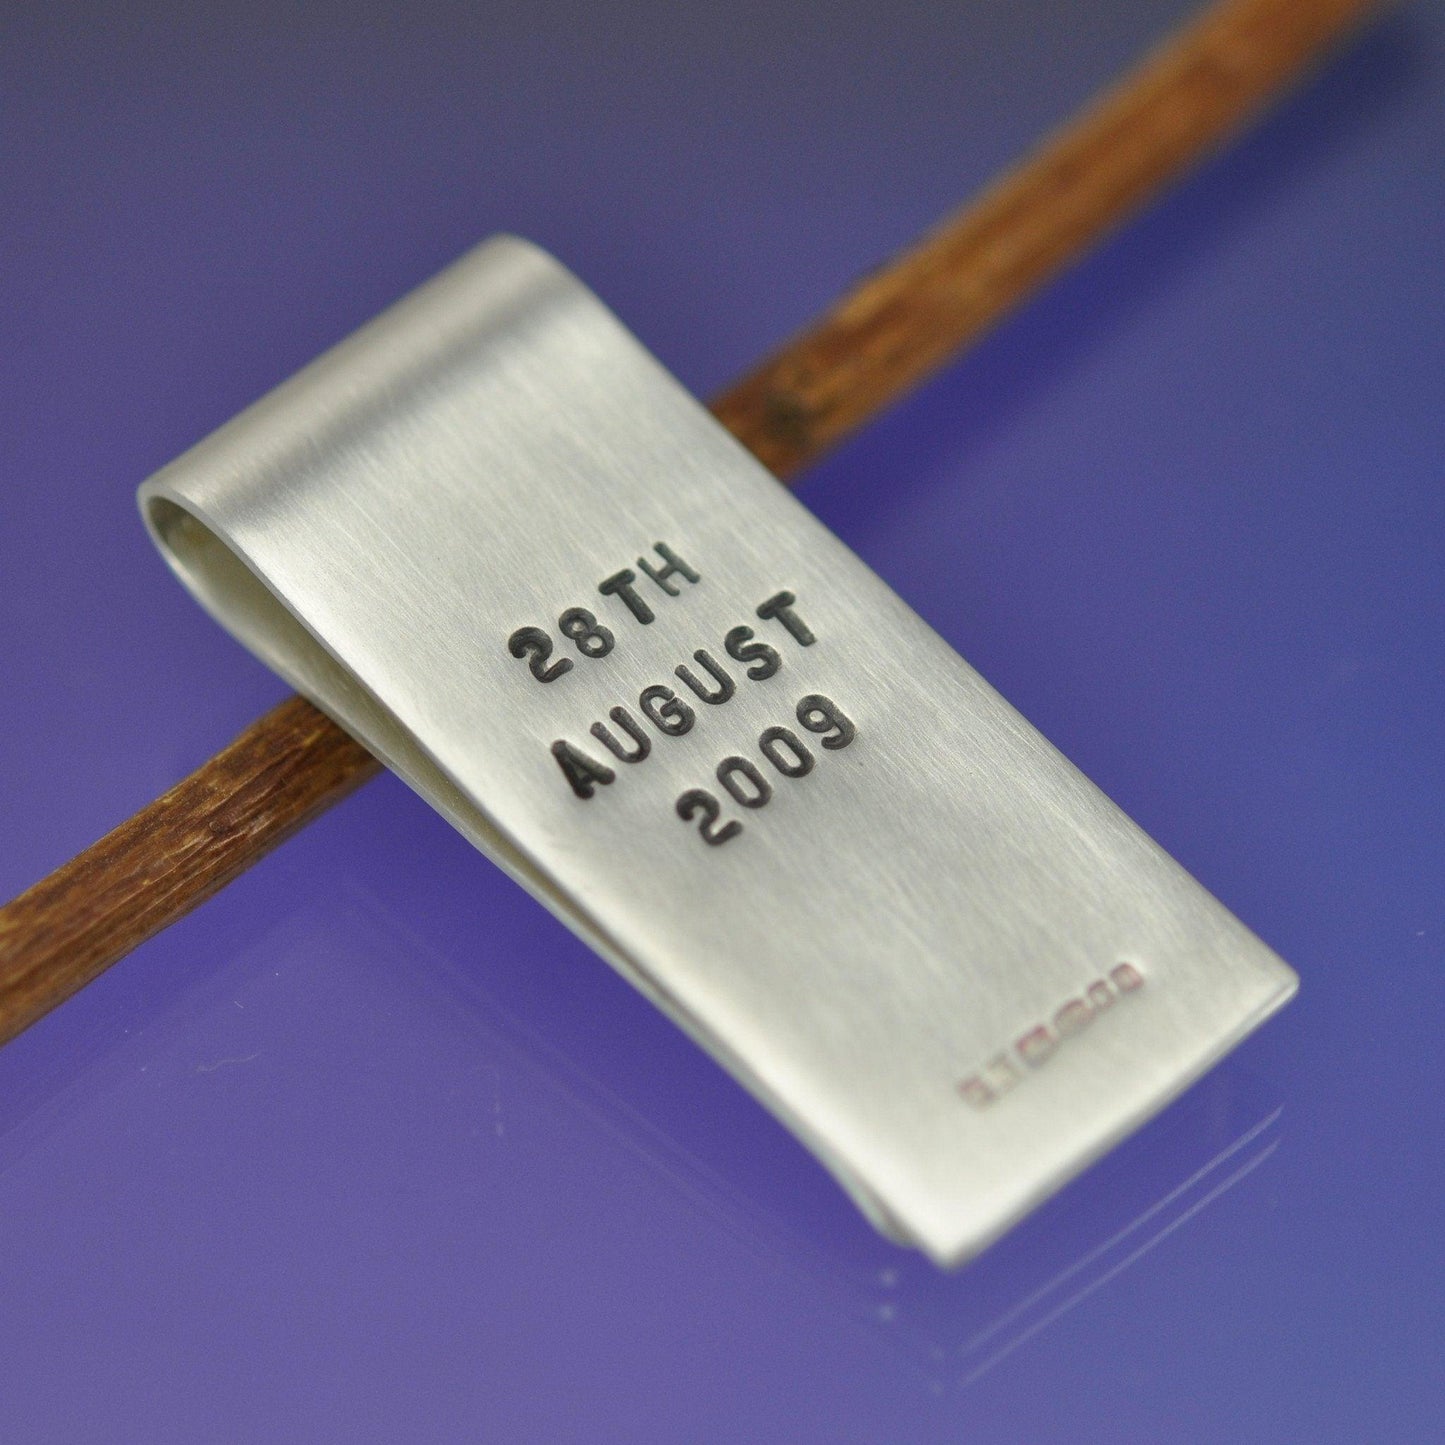 Hand Stamped Money Clip Silverware by Chris Parry Jewellery